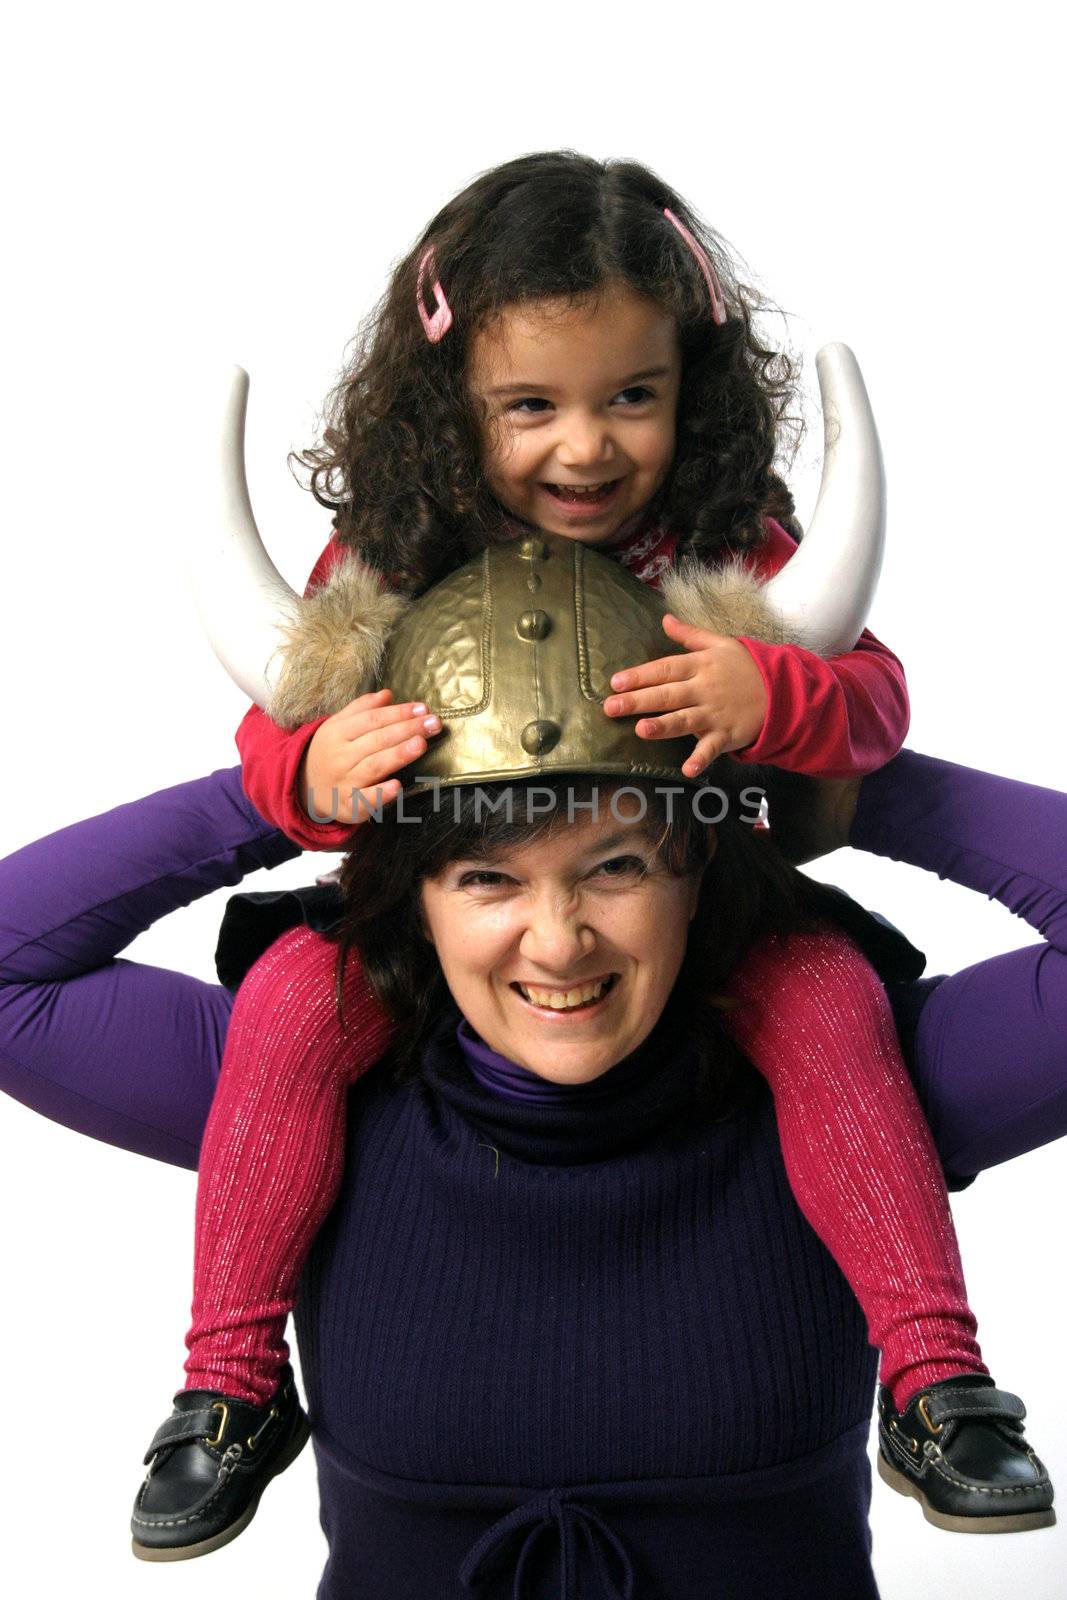 mother and child playing over white background